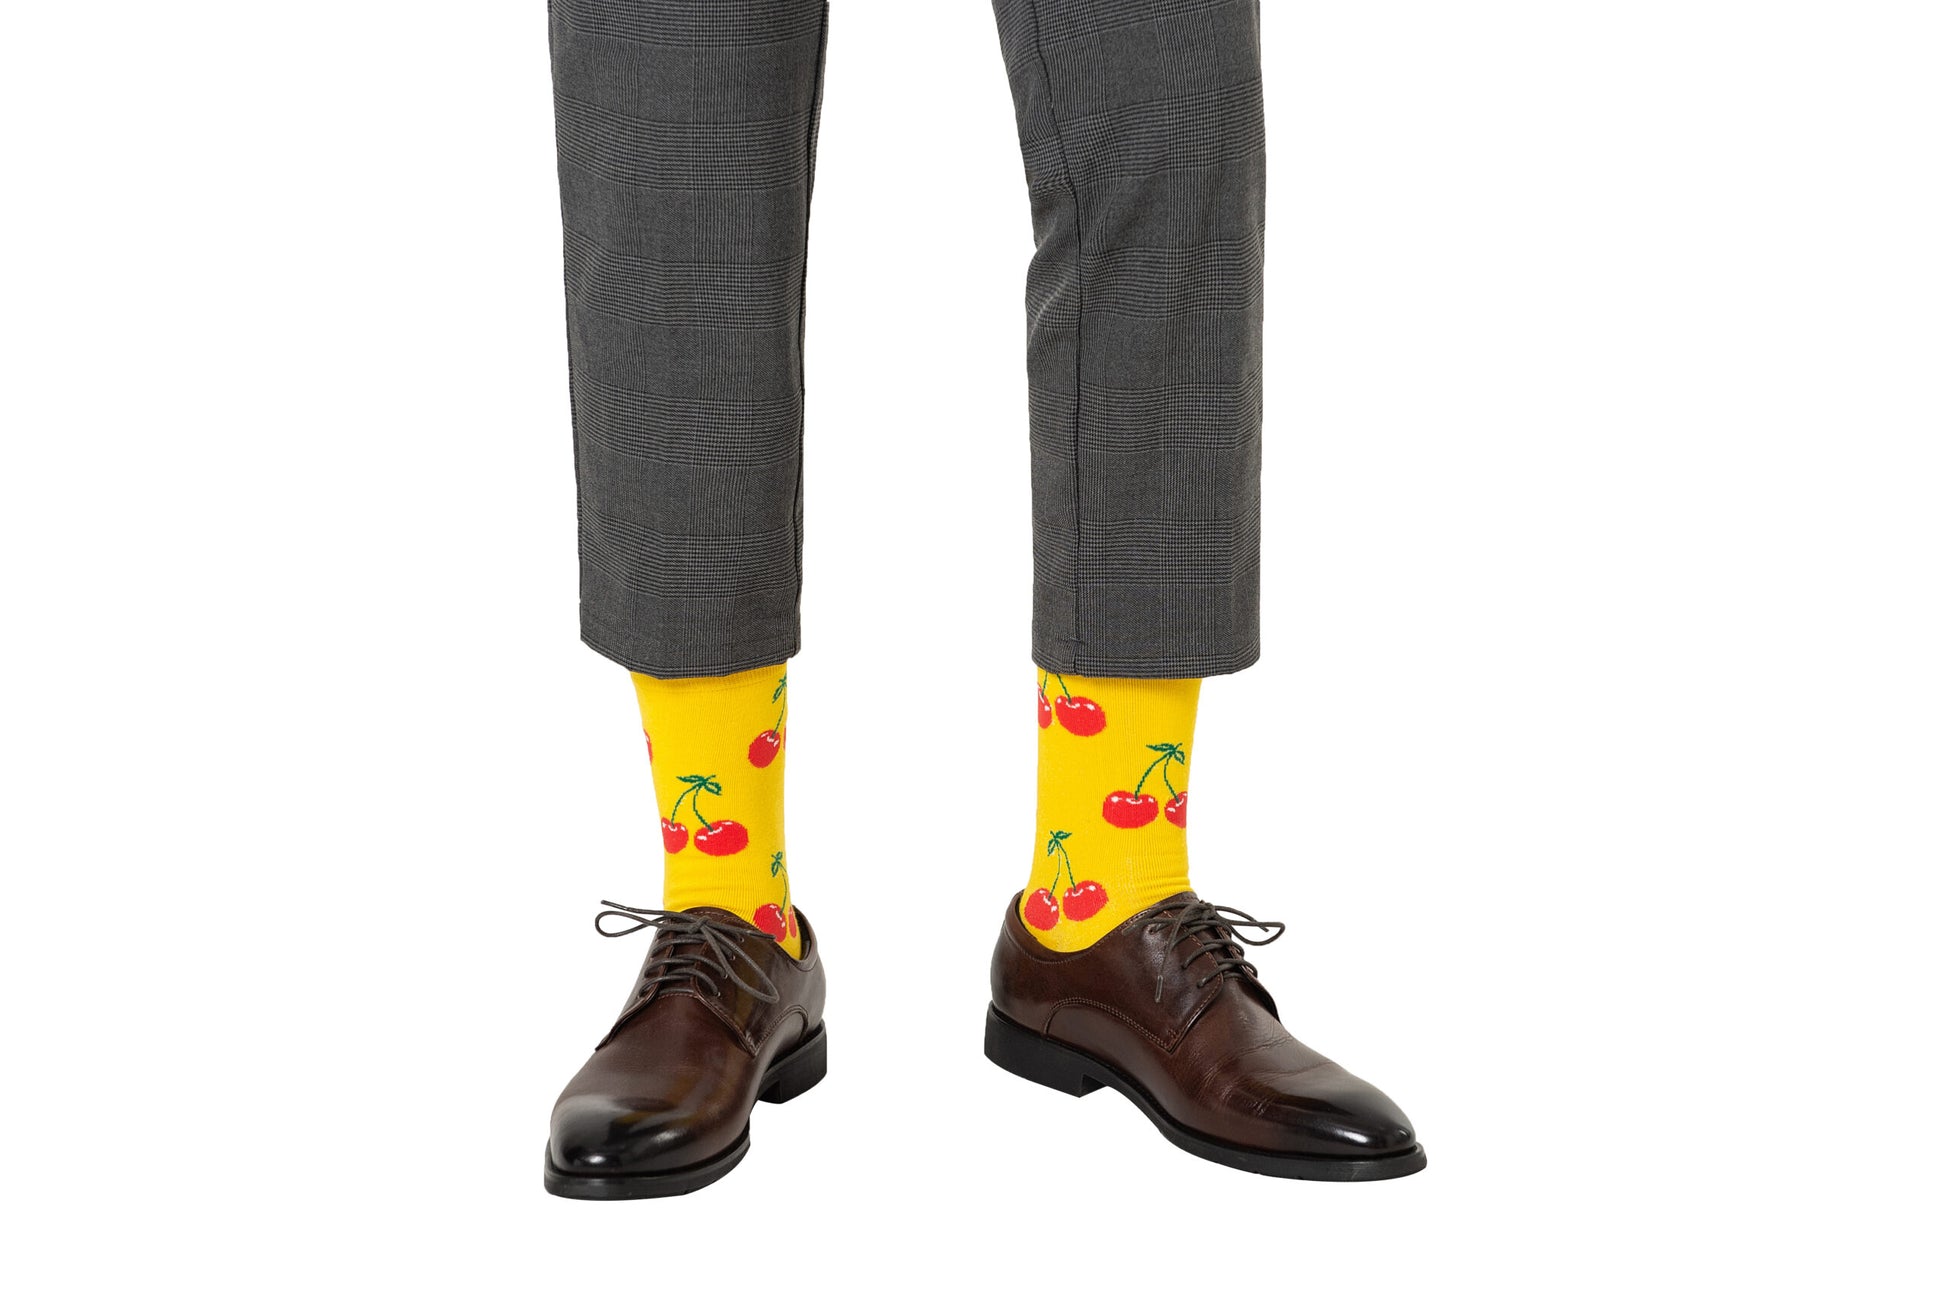 A man wearing a pair of Cherry Socks.